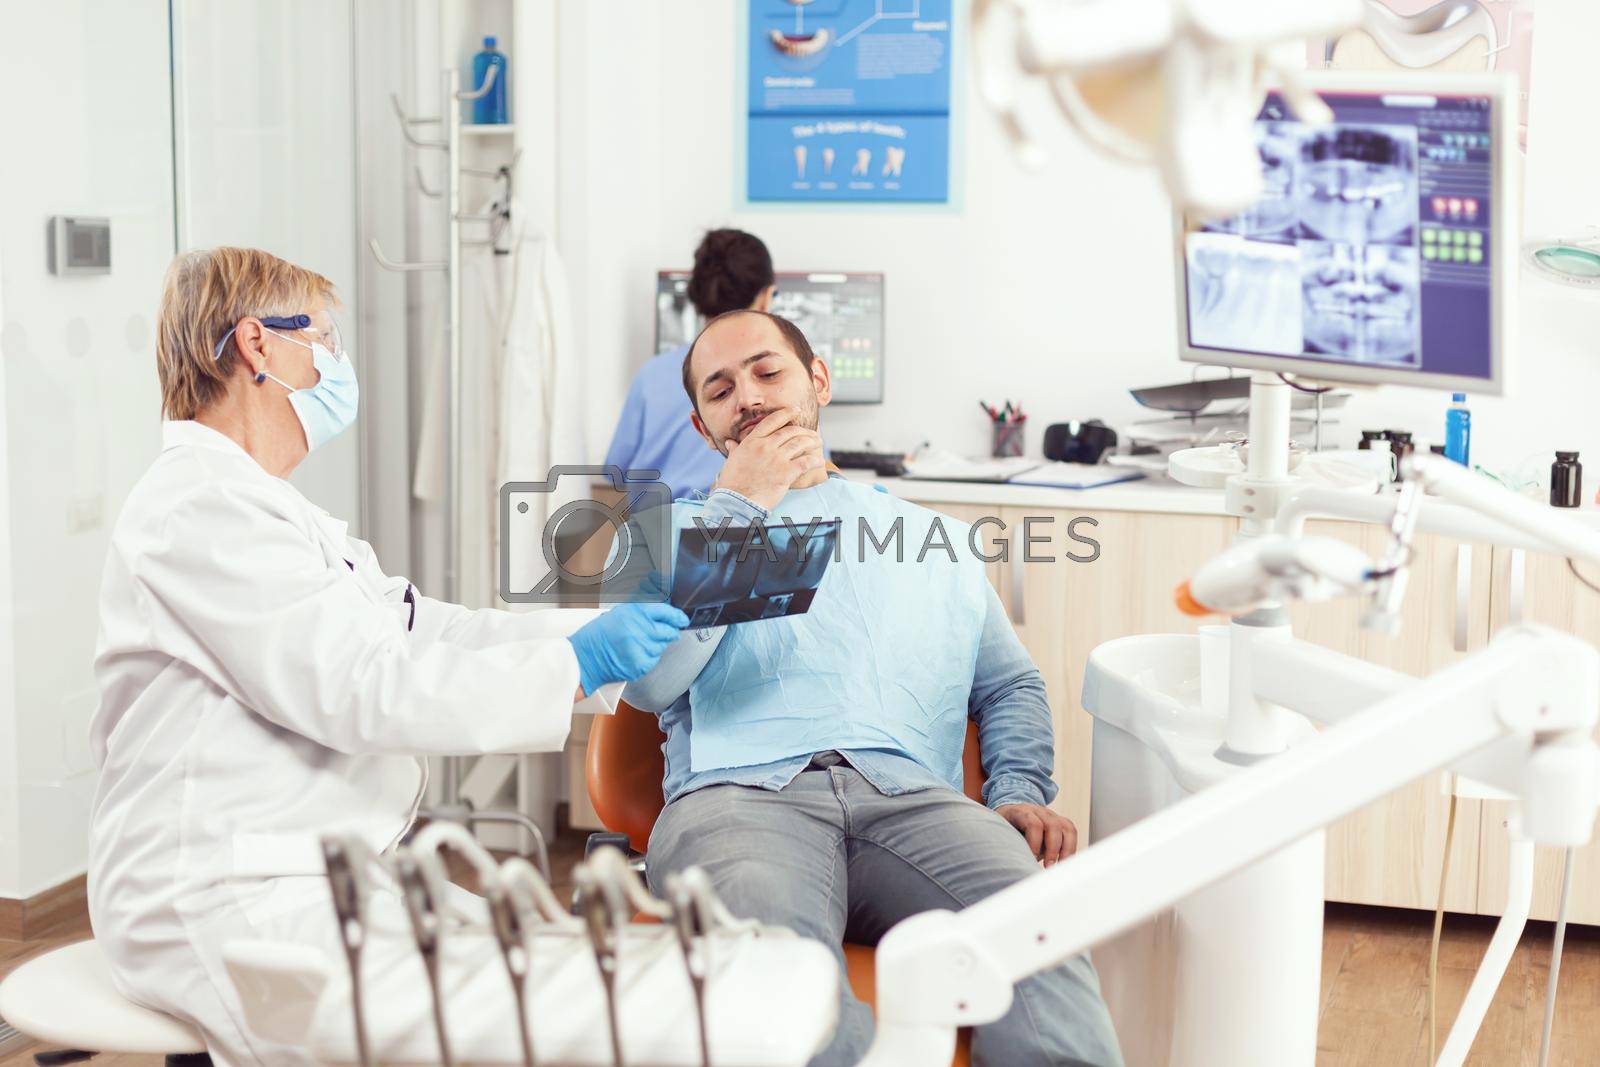 Senior woman dentist examining tooth radiography with sick man discussing toothache during stomatology appointment. Patient sitting on dental chair in hospital dentistry office